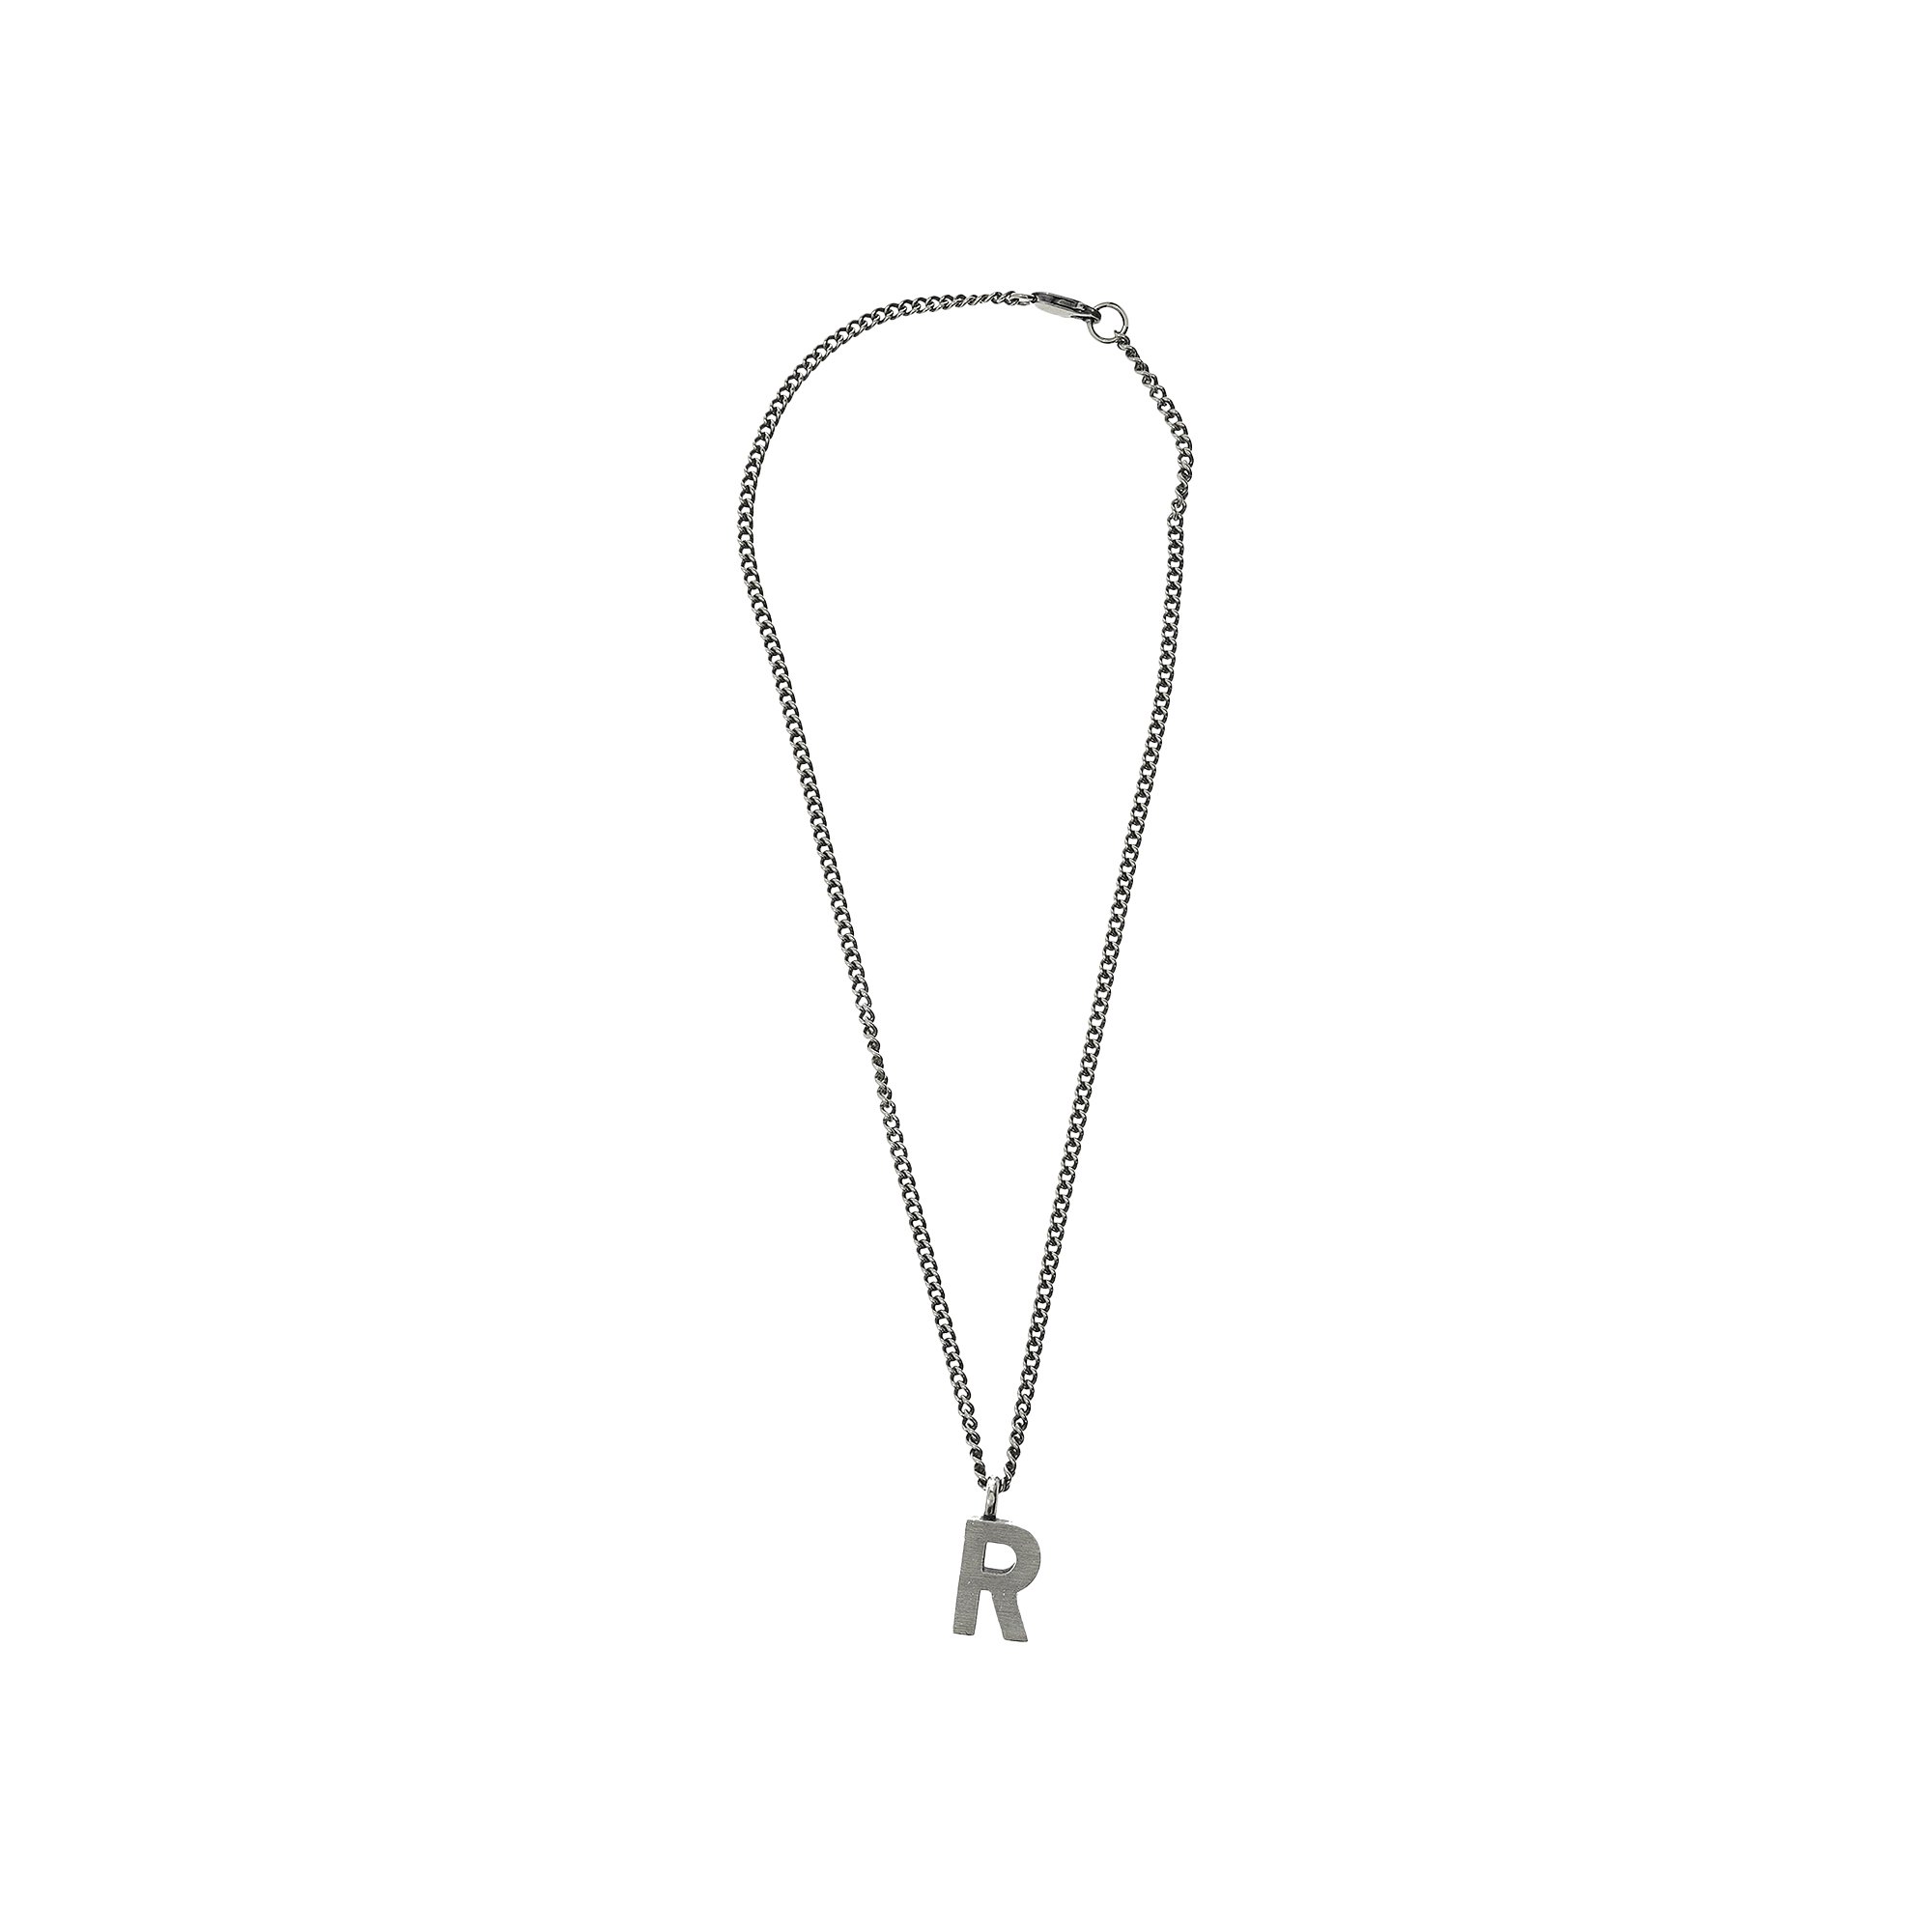 Raf Simons Redux Necklace With R Pendant 'Silver' | GOAT